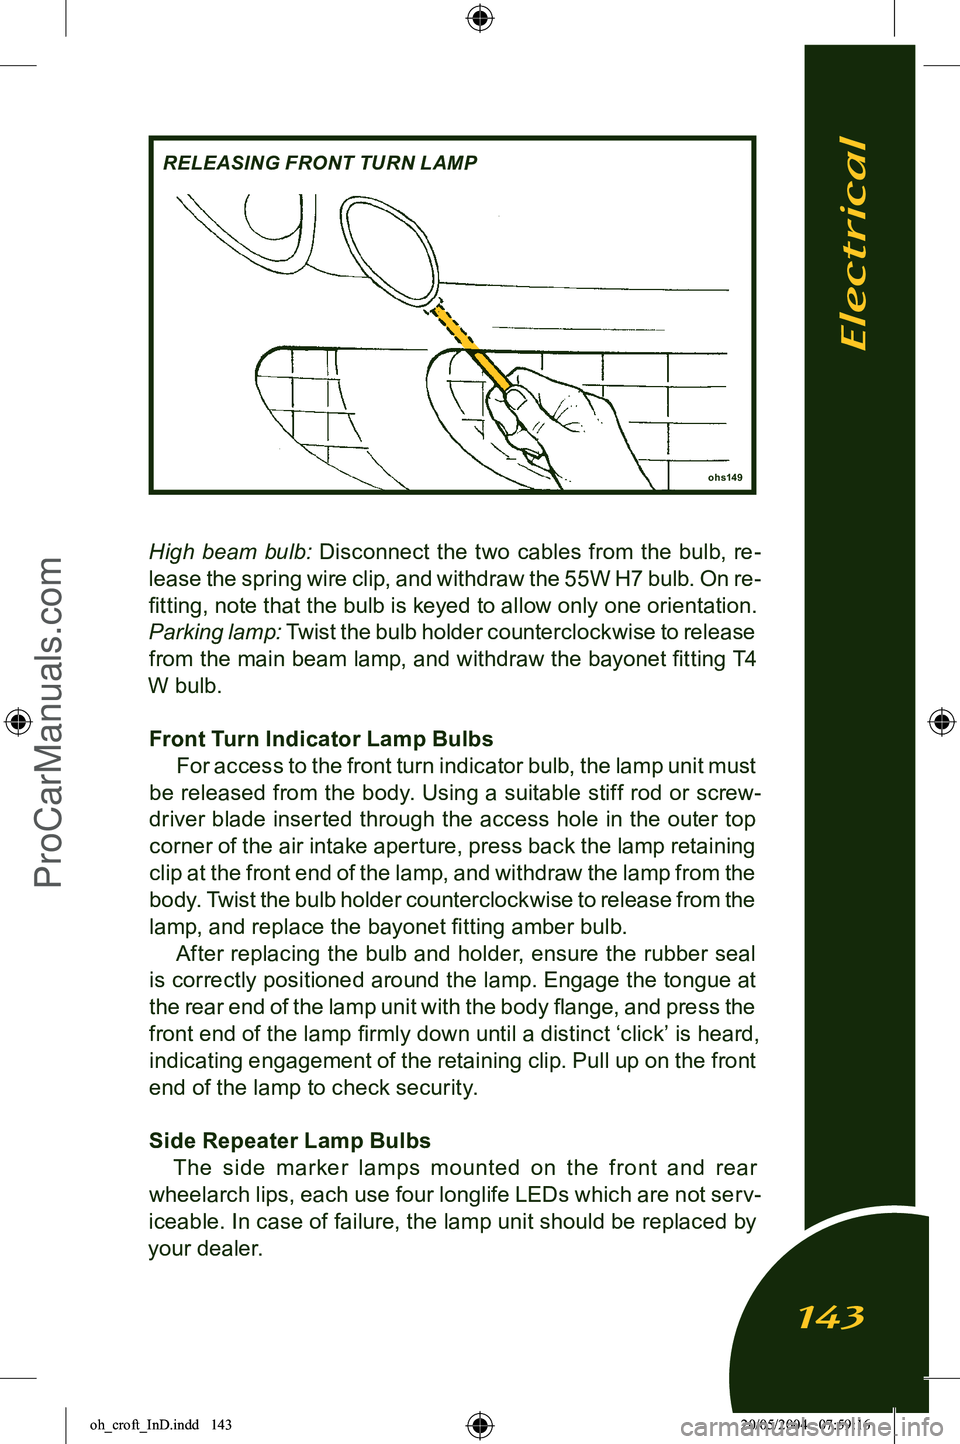 LOTUS ELISE 2005 Service Manual 
High  beam  bulb:  Disconnect  the  two  cables  from  the  bulb,  re-
lease the spring wire clip, and withdraw the 55W H7 bulb. On re
-
ﬁtting, note that the bulb is keyed to allow only one orient